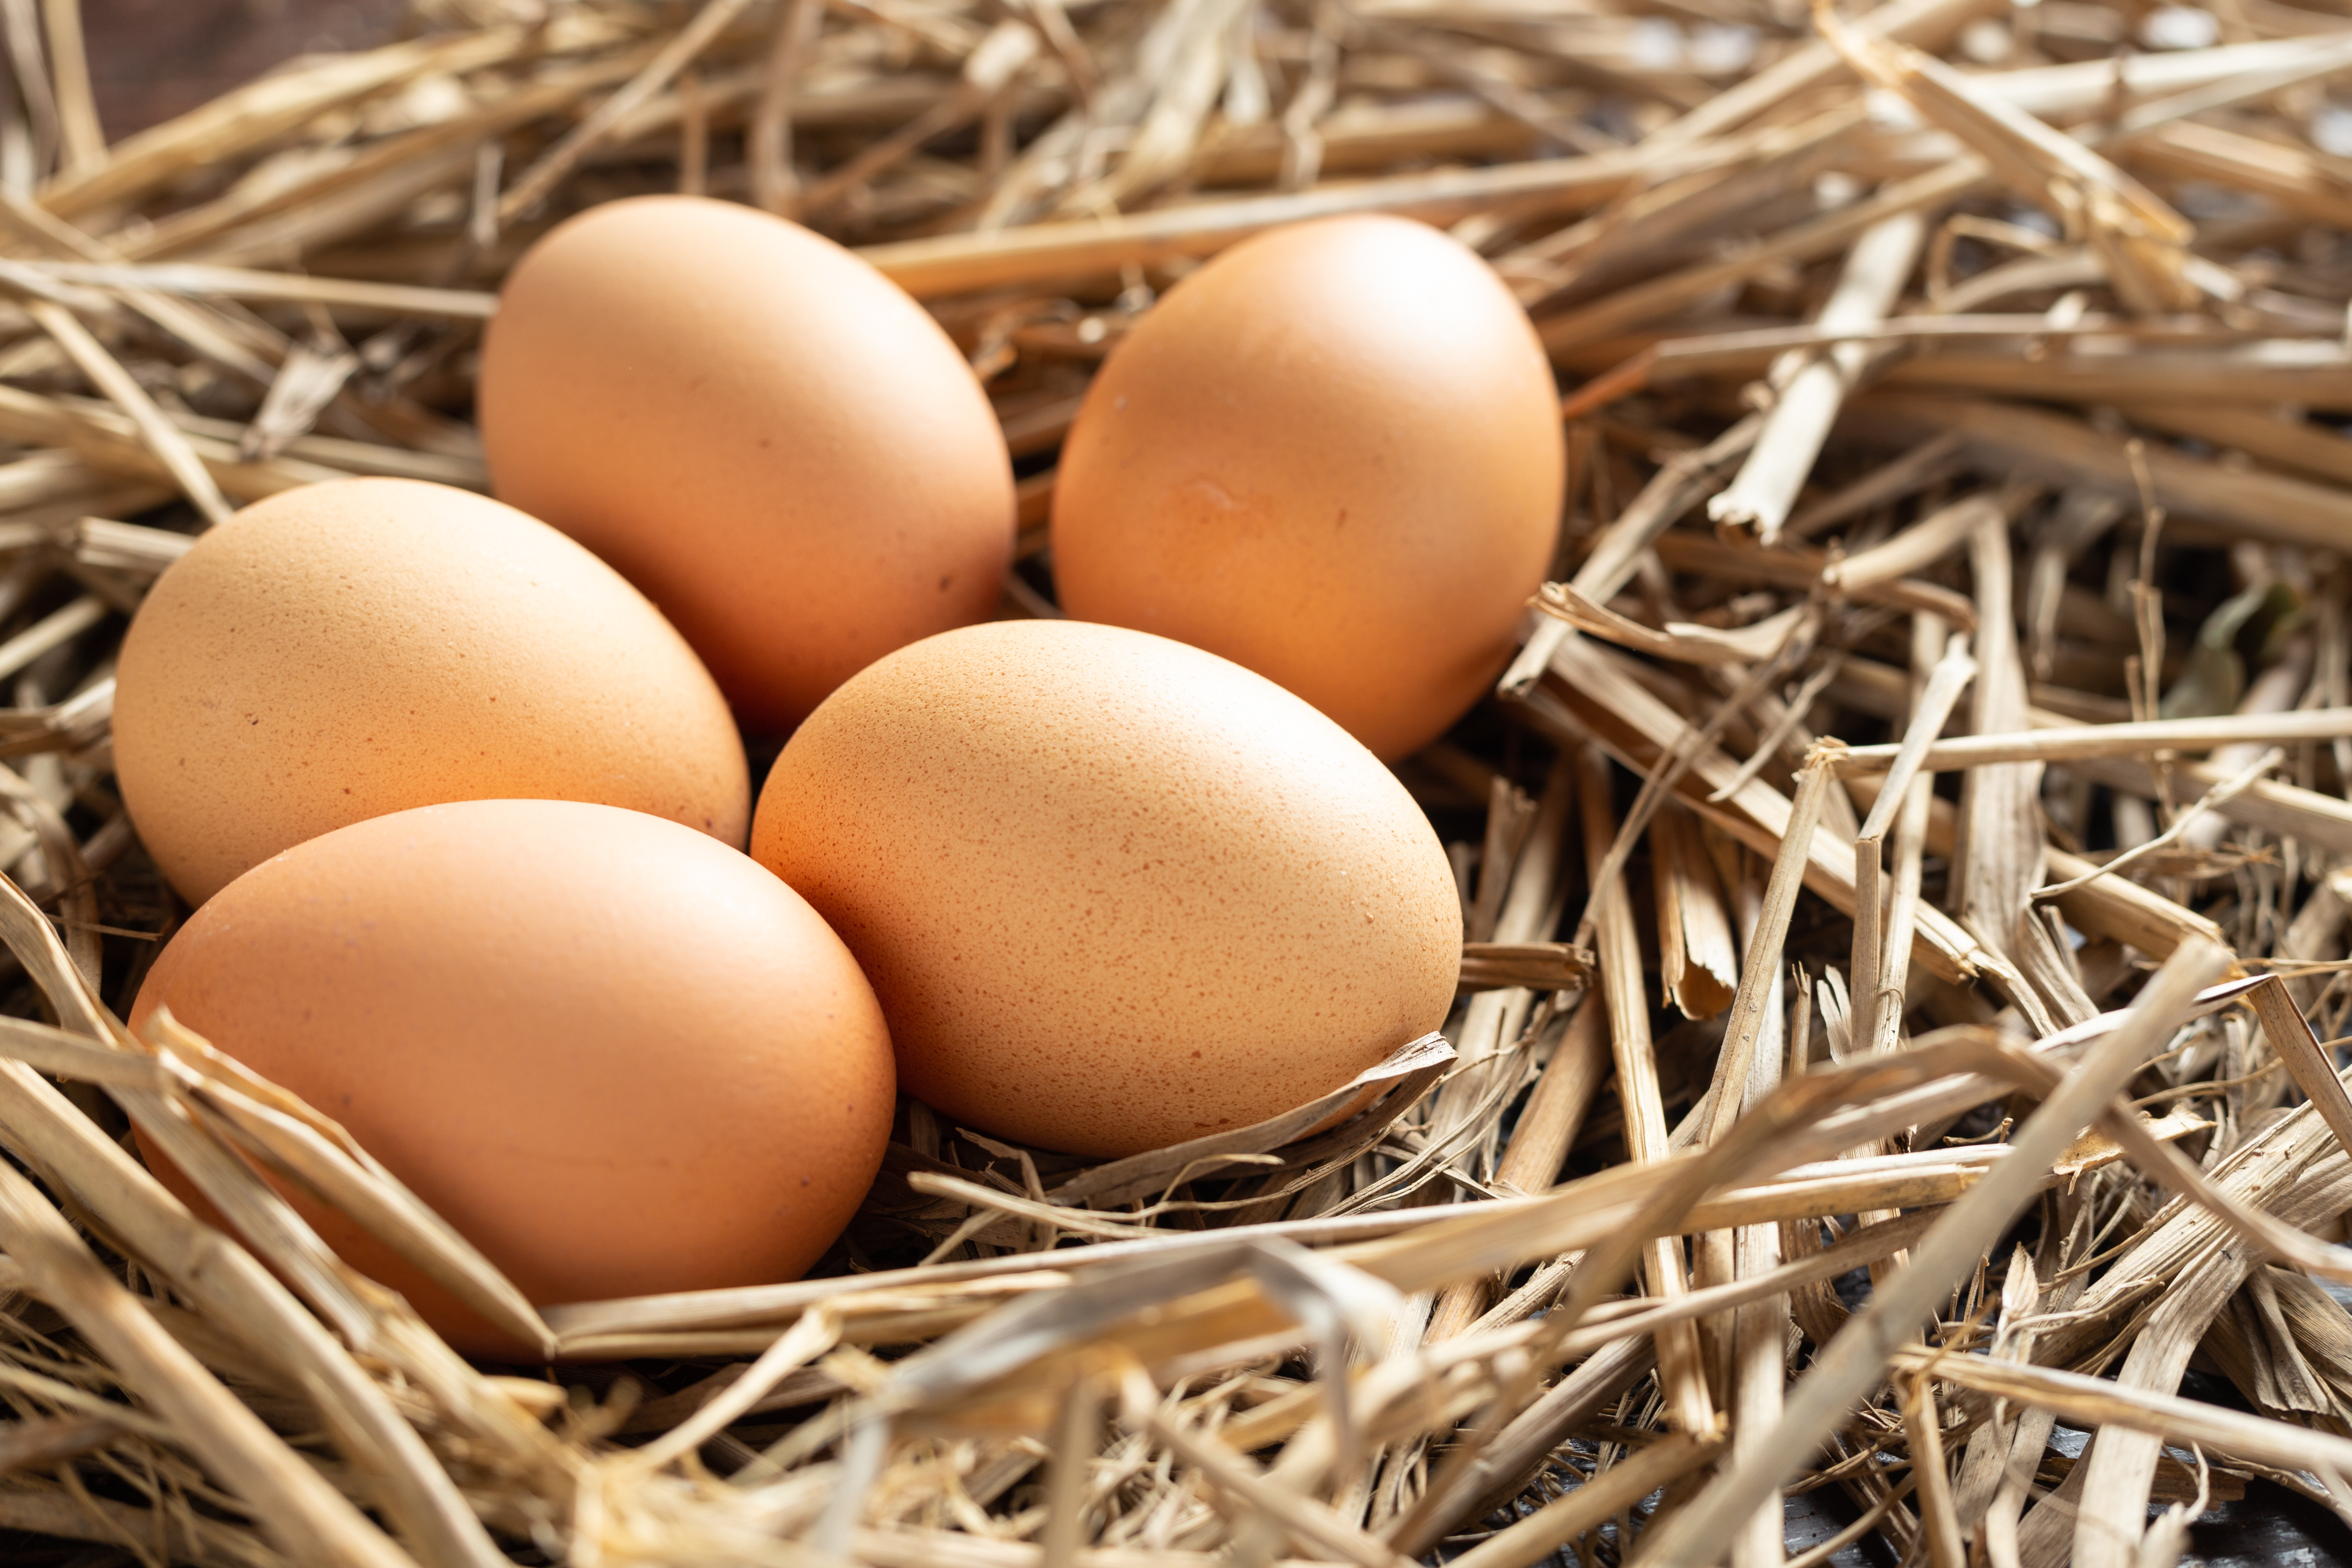 Poultry farming advice to stop hens breaking eggs